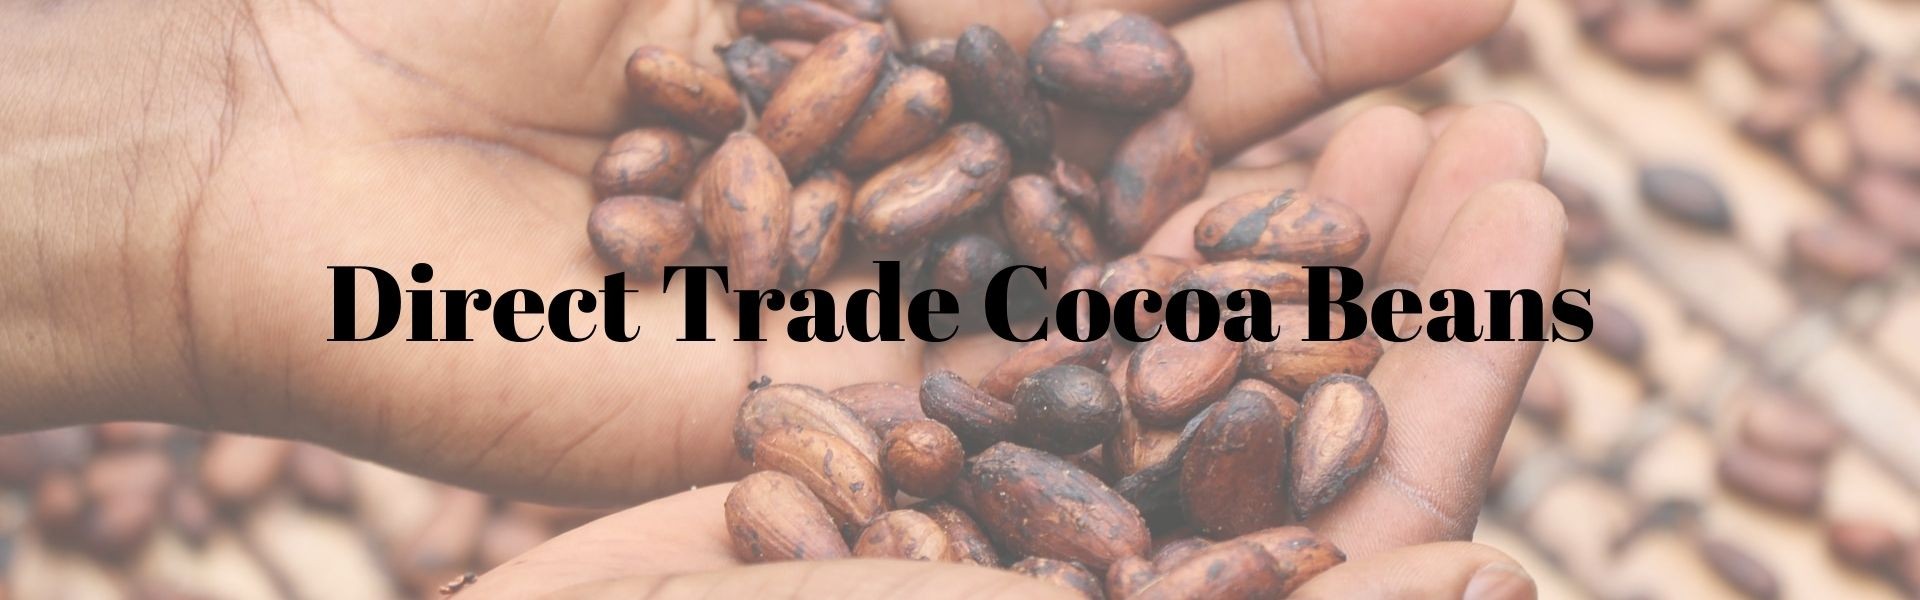 cocoa beans Promotion 101